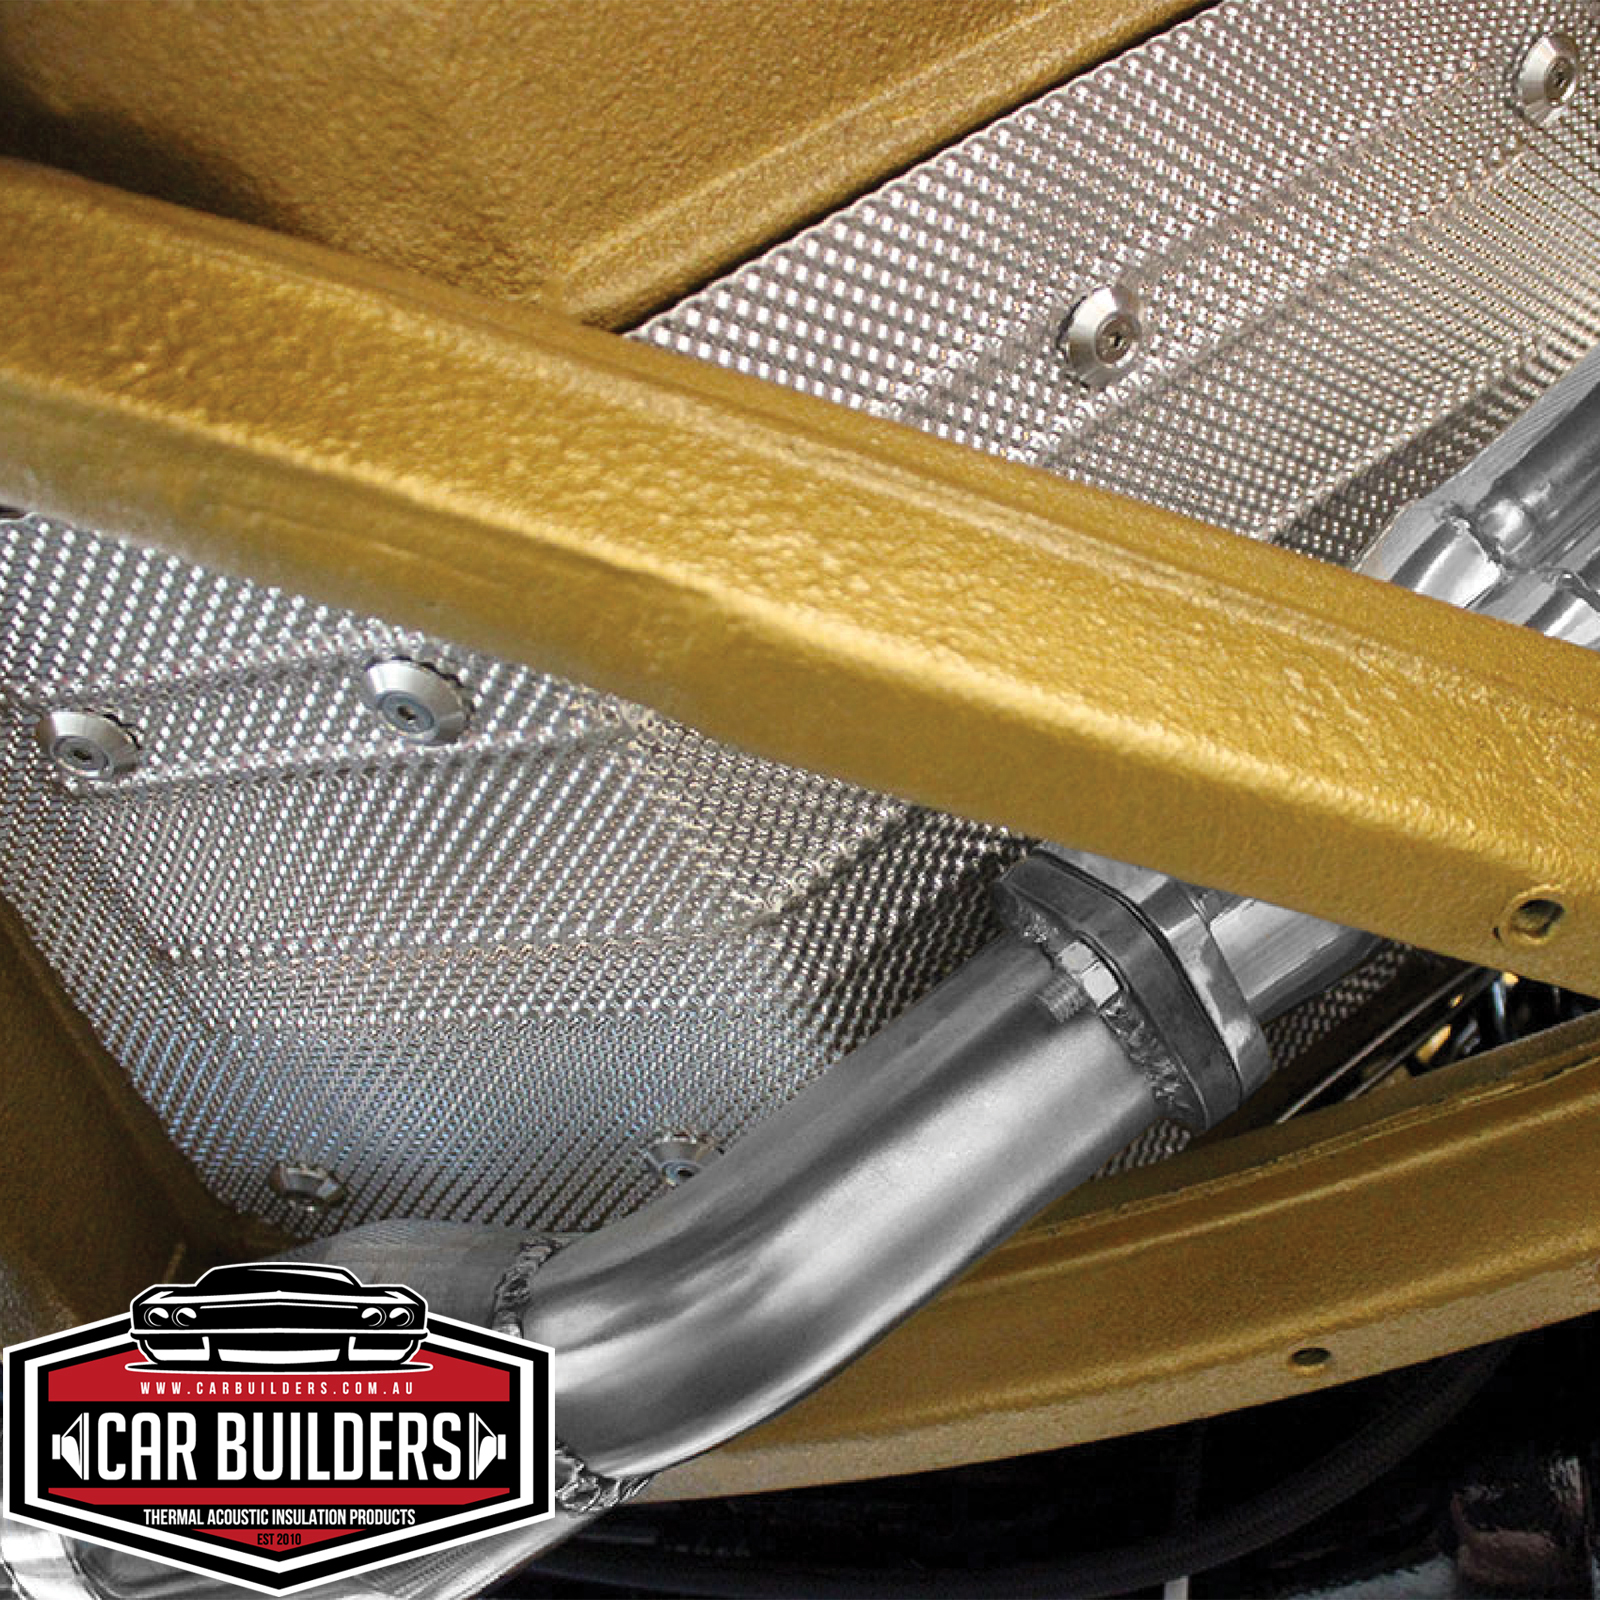 Aluminium Heat Shield - Quality Materials to Keep Your Ride Cool